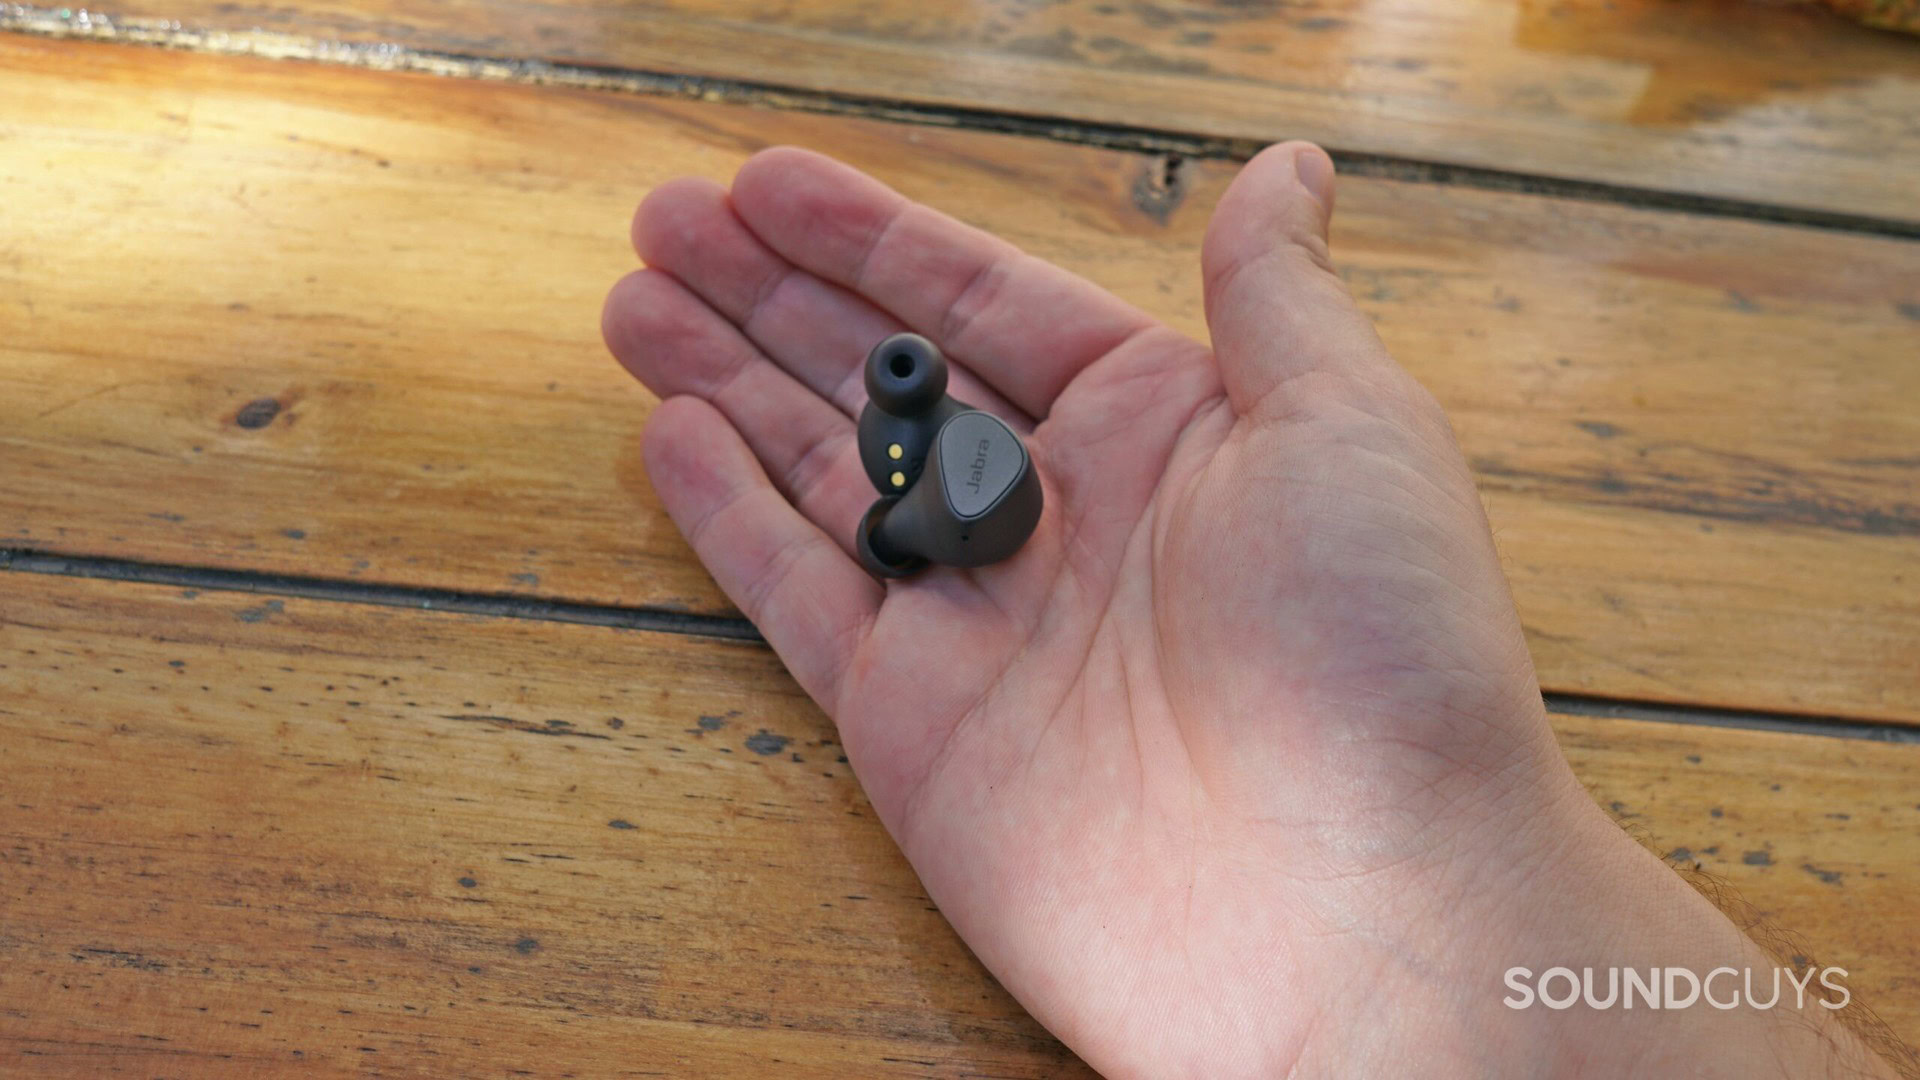 One Jabra Elite 3 earbud in a hand, showing the ear tip.